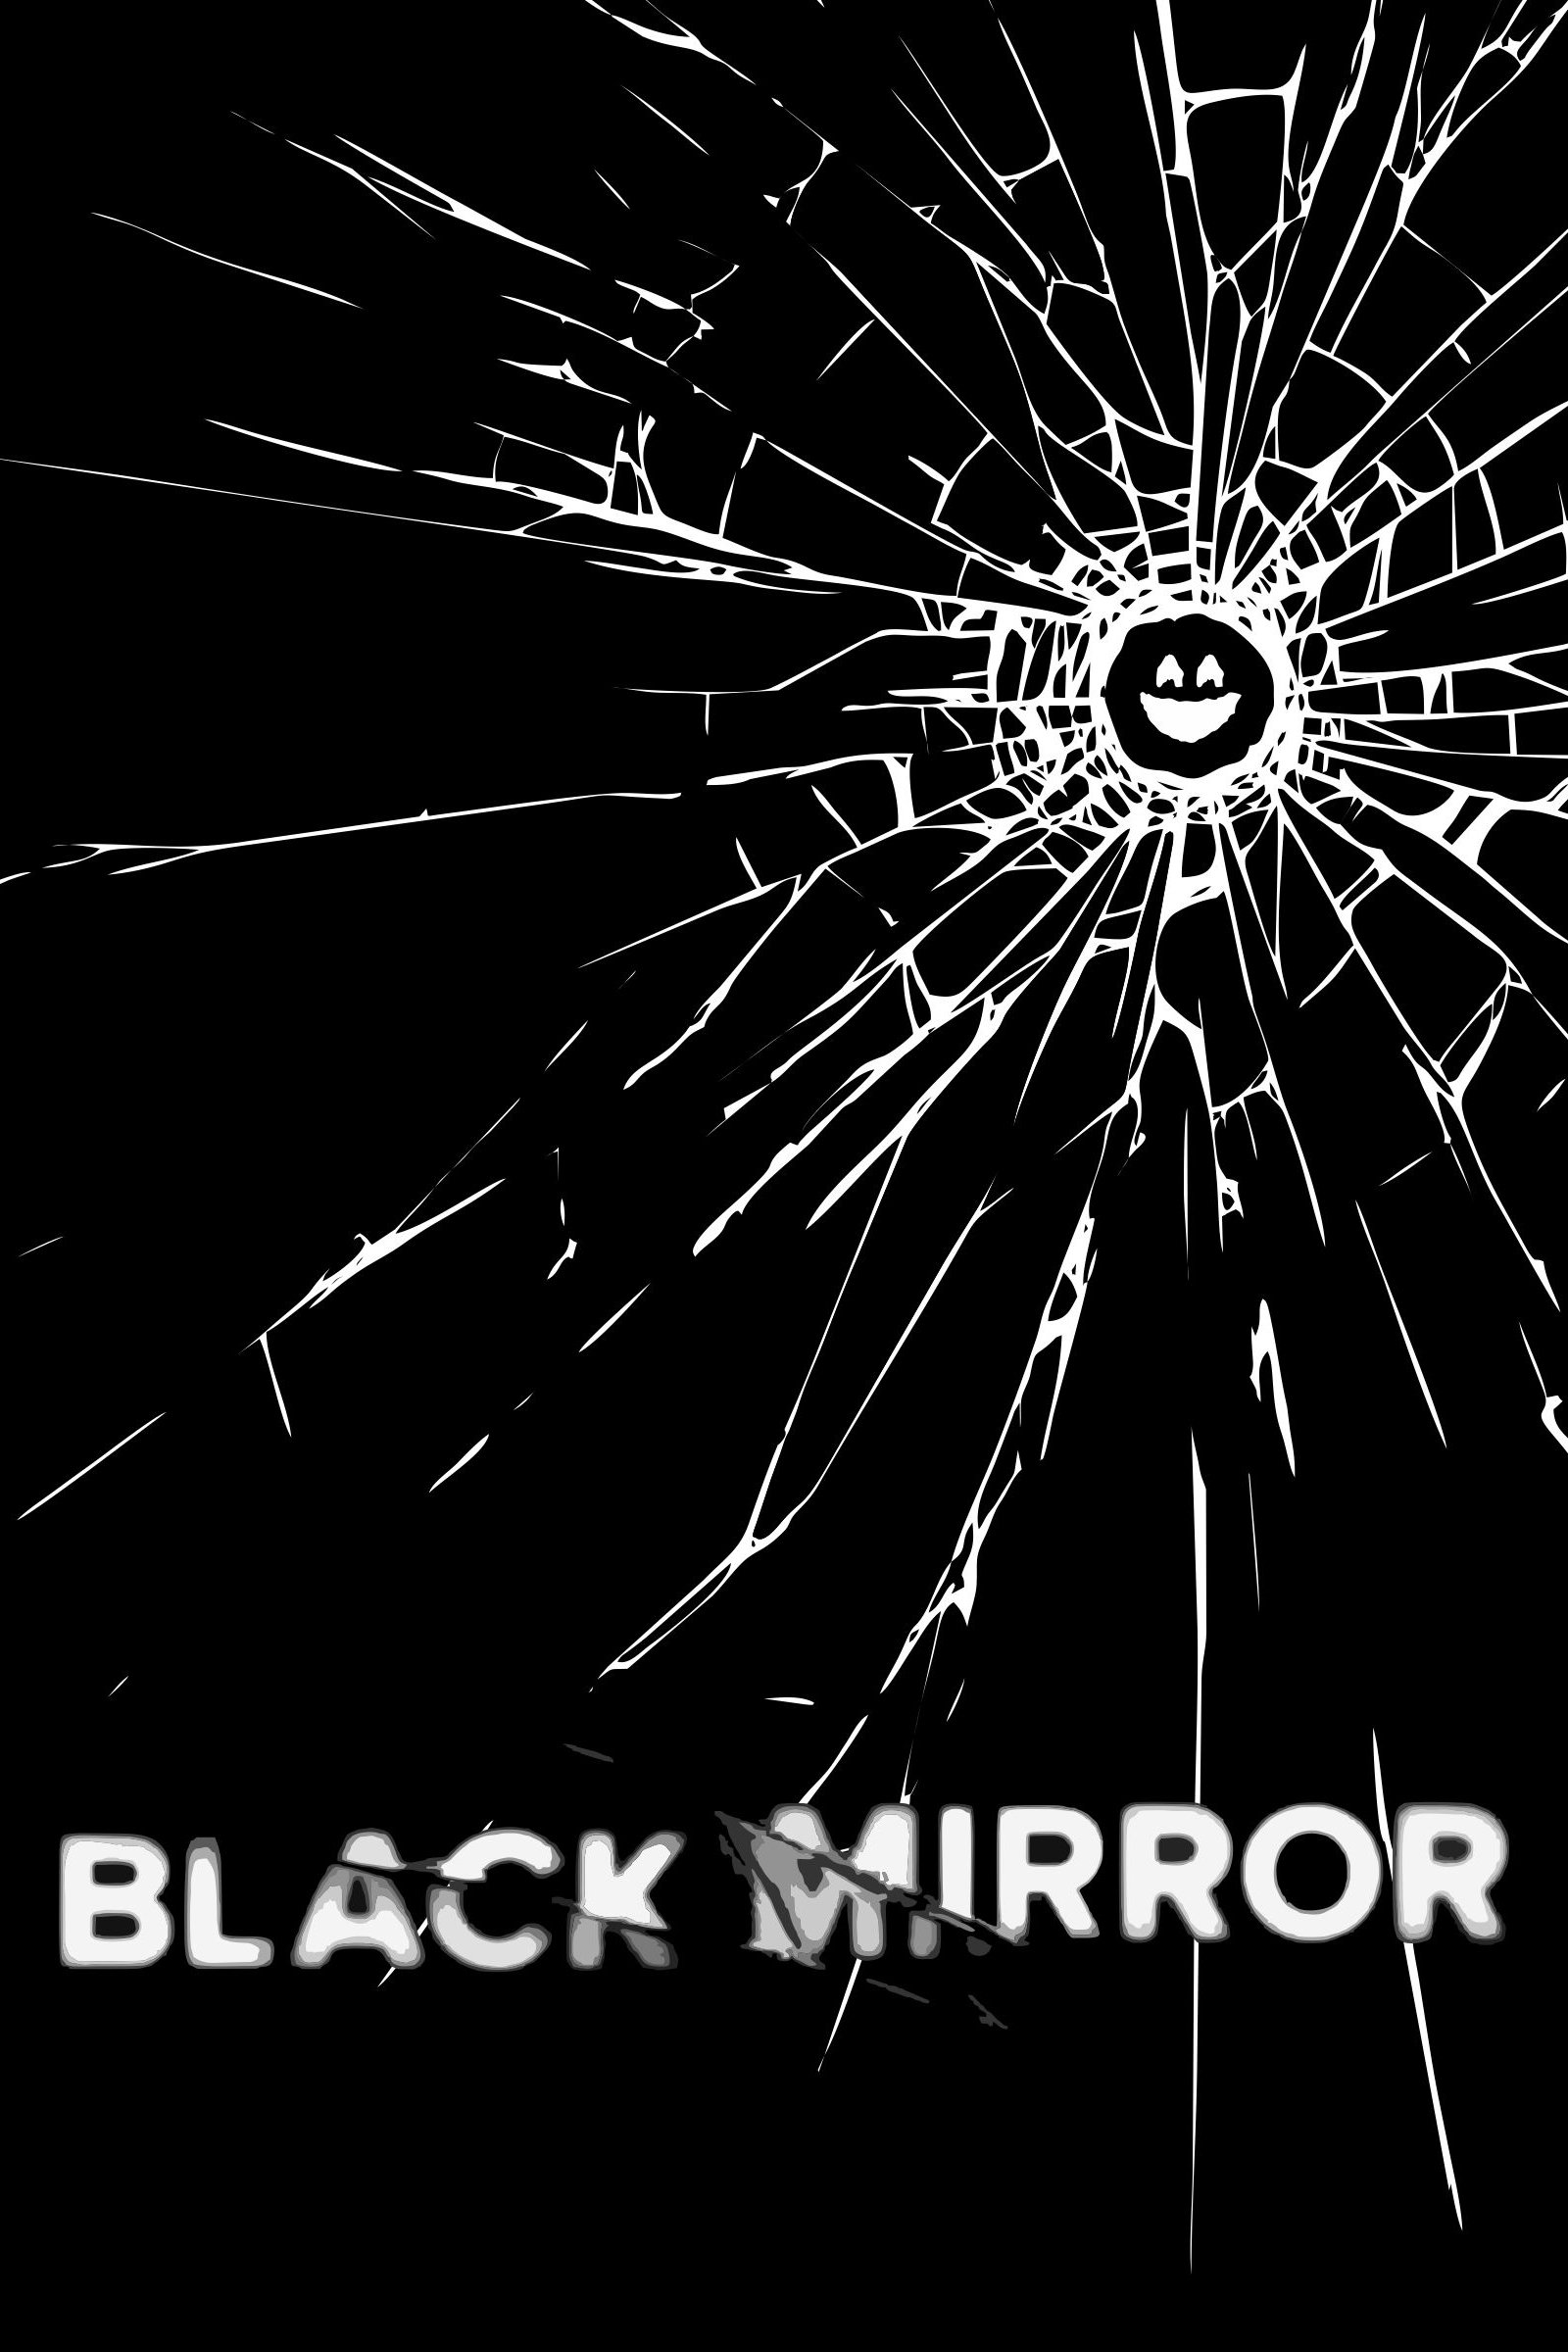 Black Mirror Picture - Image Abyss.